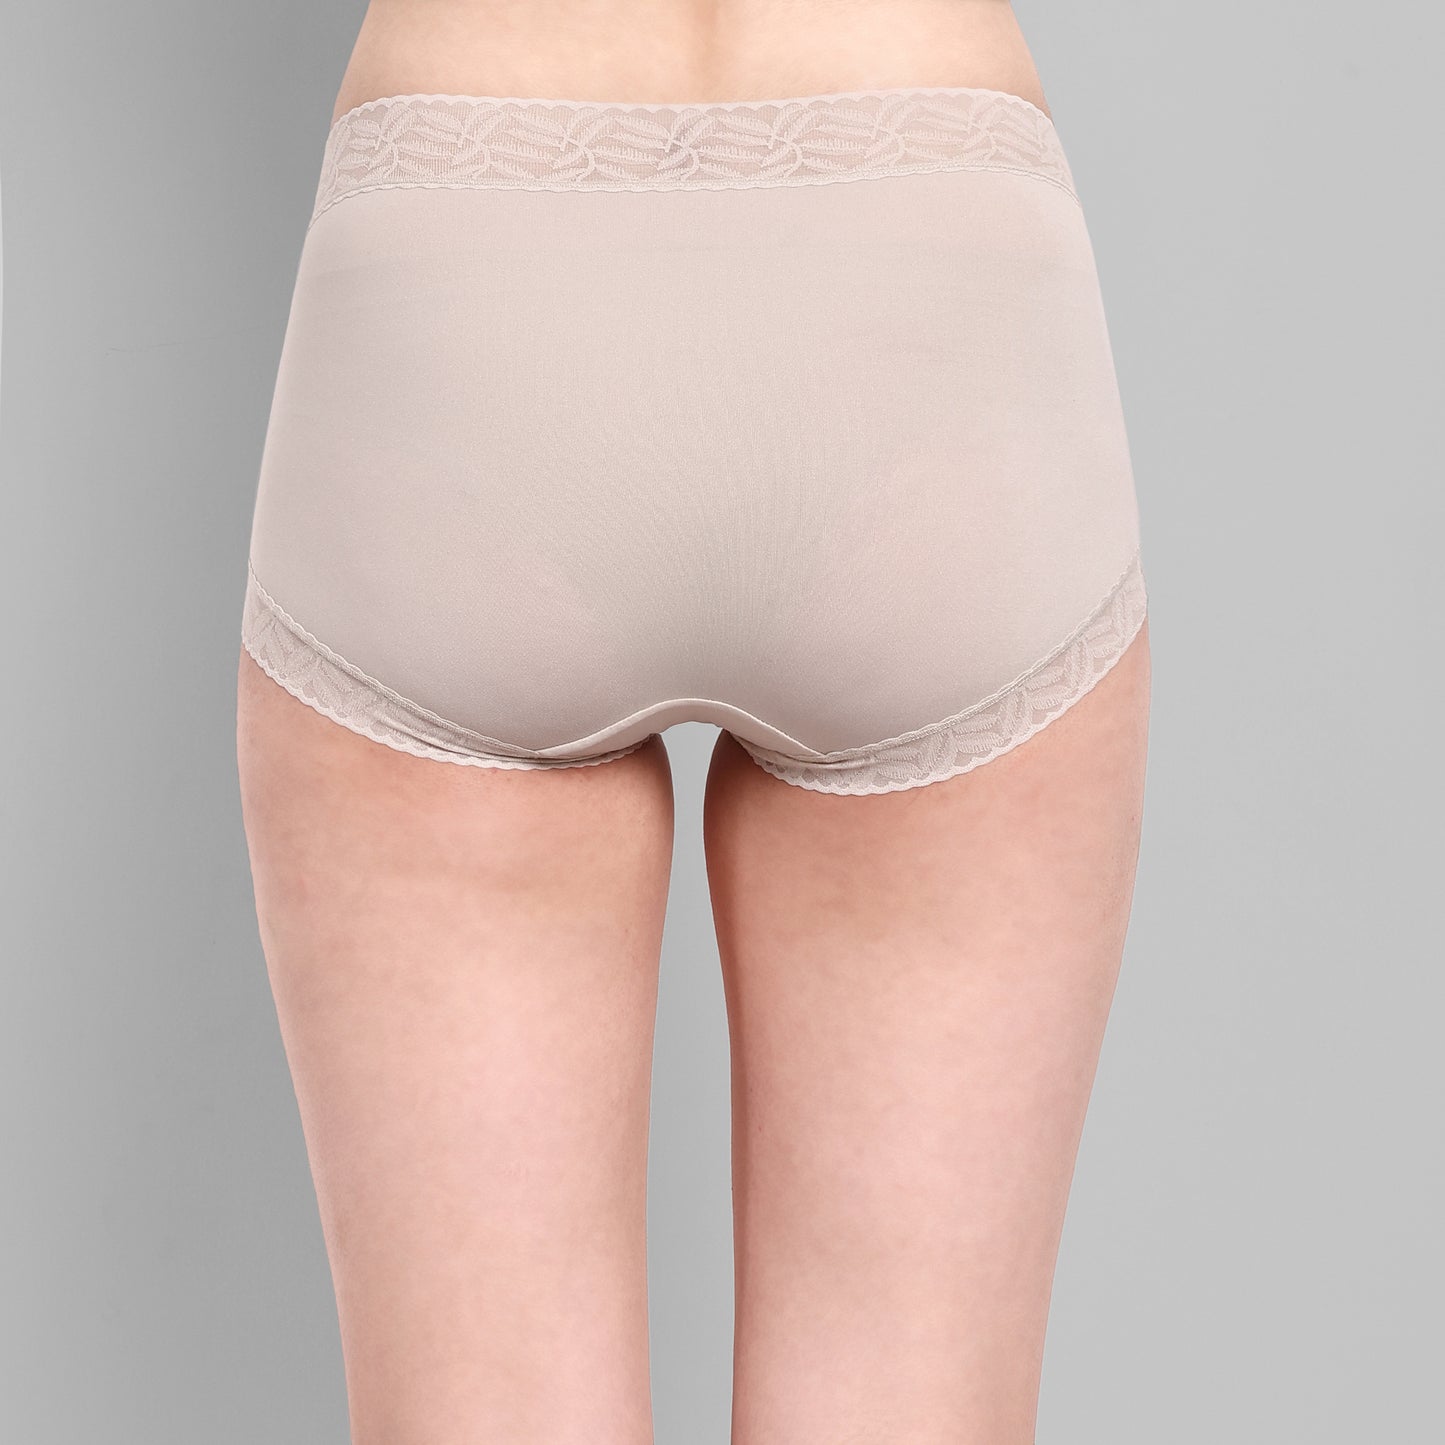 Women's Briefs Cotton Smooth BoyShorts Panty, Pack Of 3